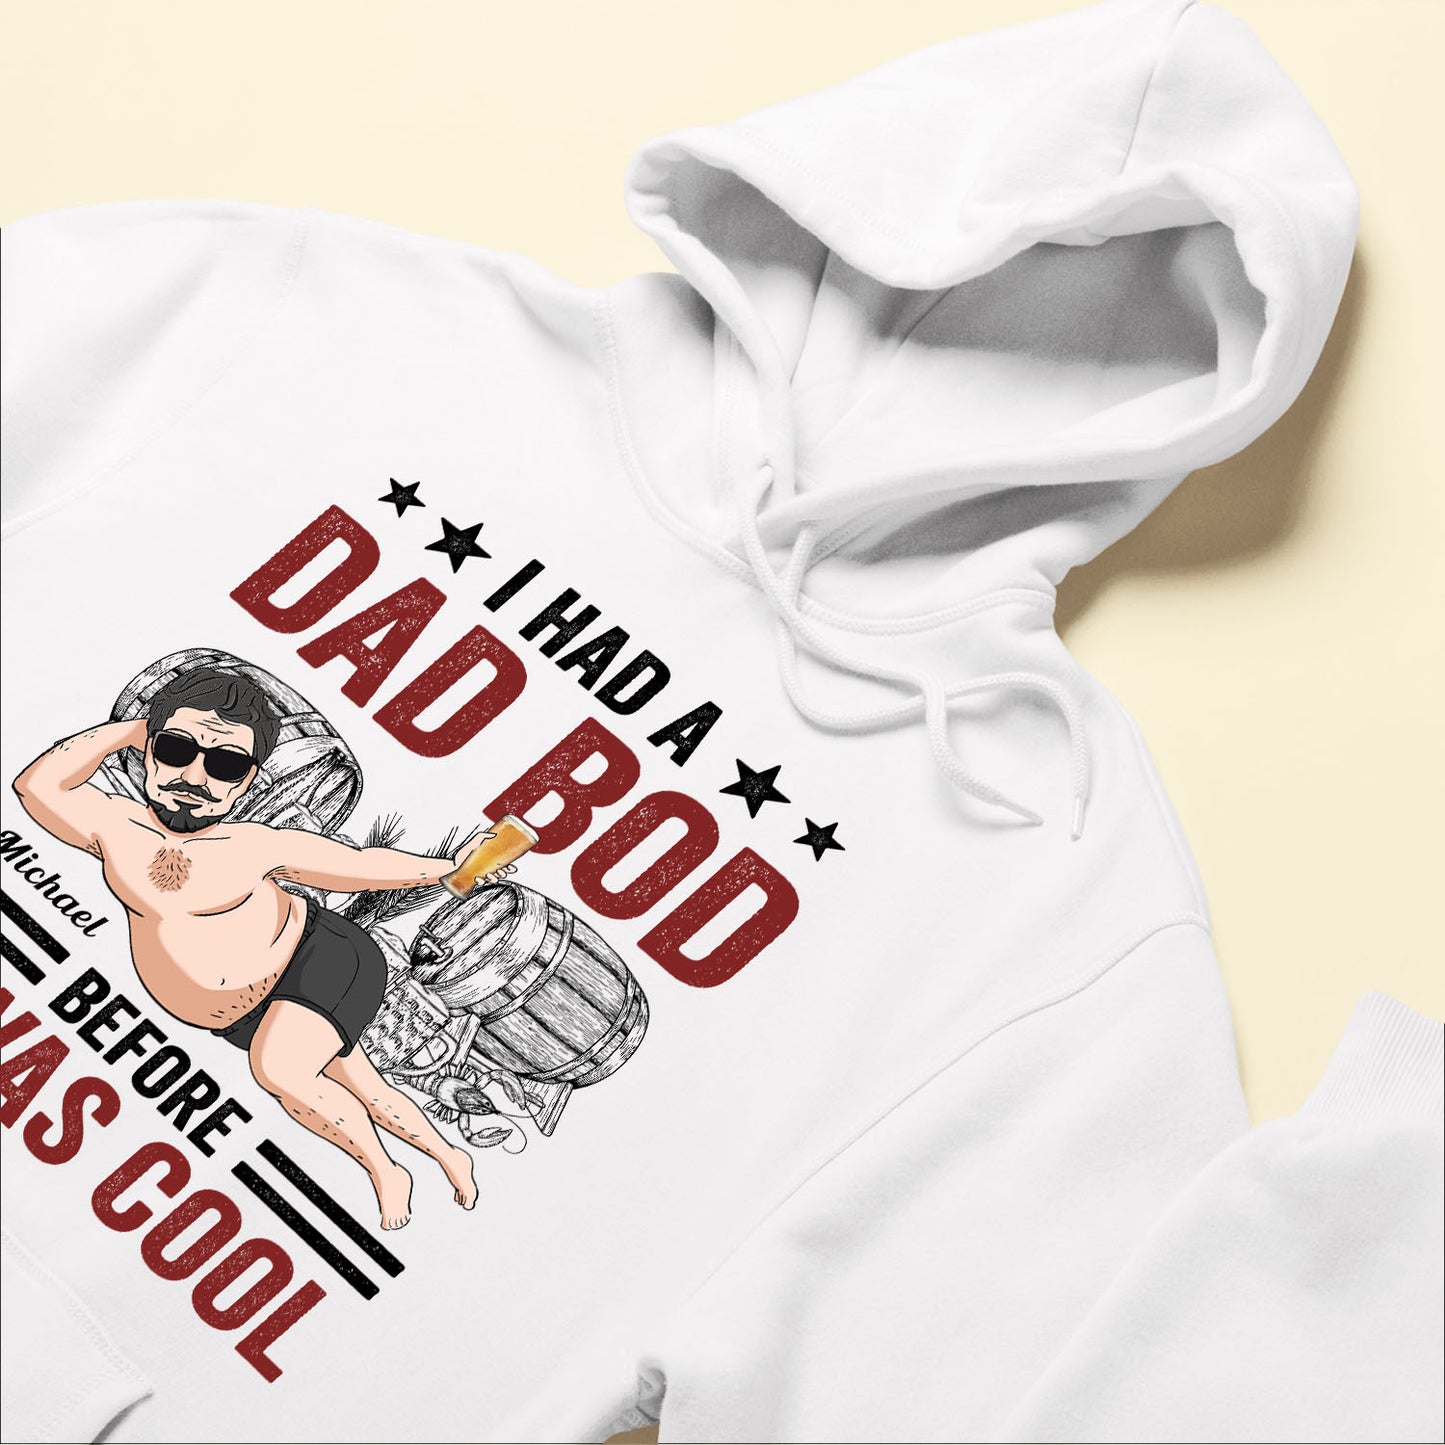 Dad Bod Before It Was Cool - Personalized Apparel Father's Day - Gift For Father, Dad, Grandpa